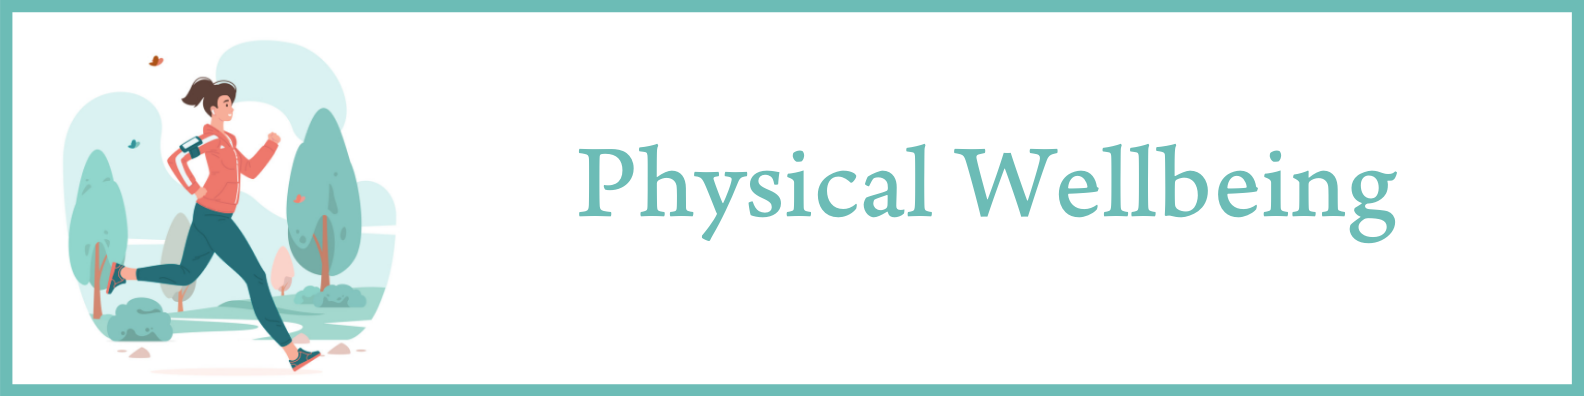 Physical Wellbeing Banner